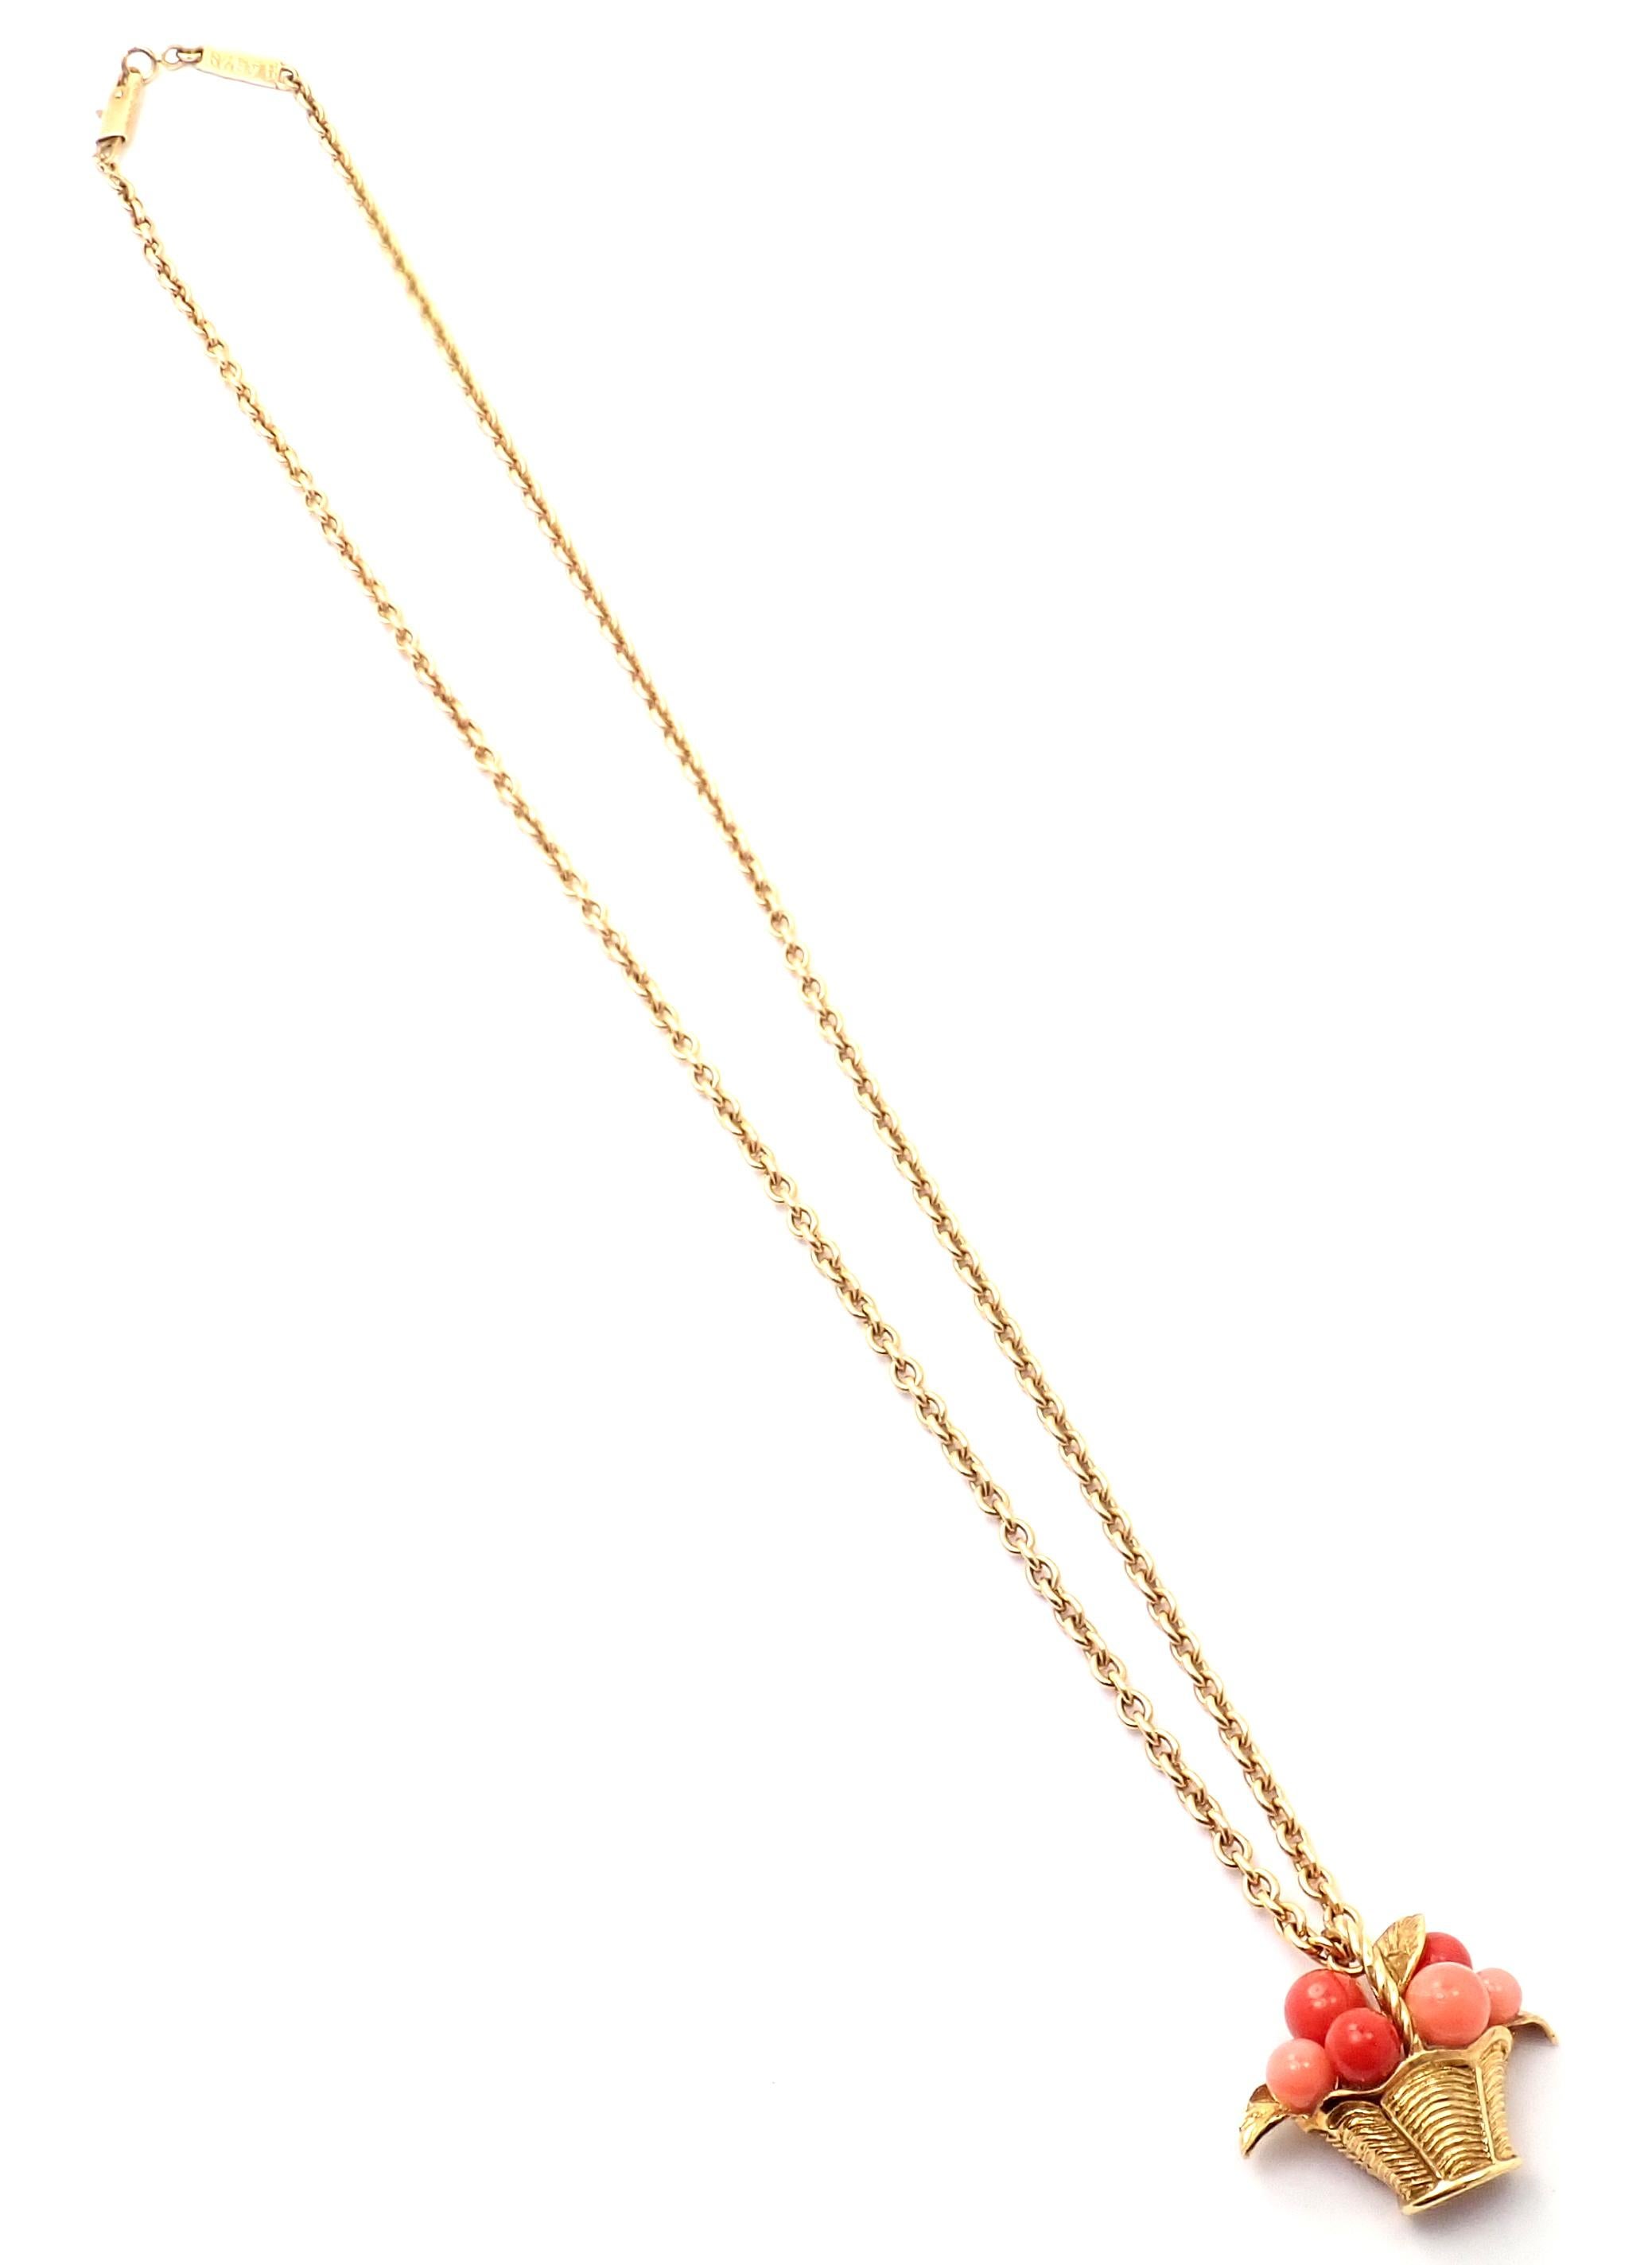 Van Cleef & Arpels Coral Bead Fruit Basket Yellow Gold Pendant Necklace For Sale 1